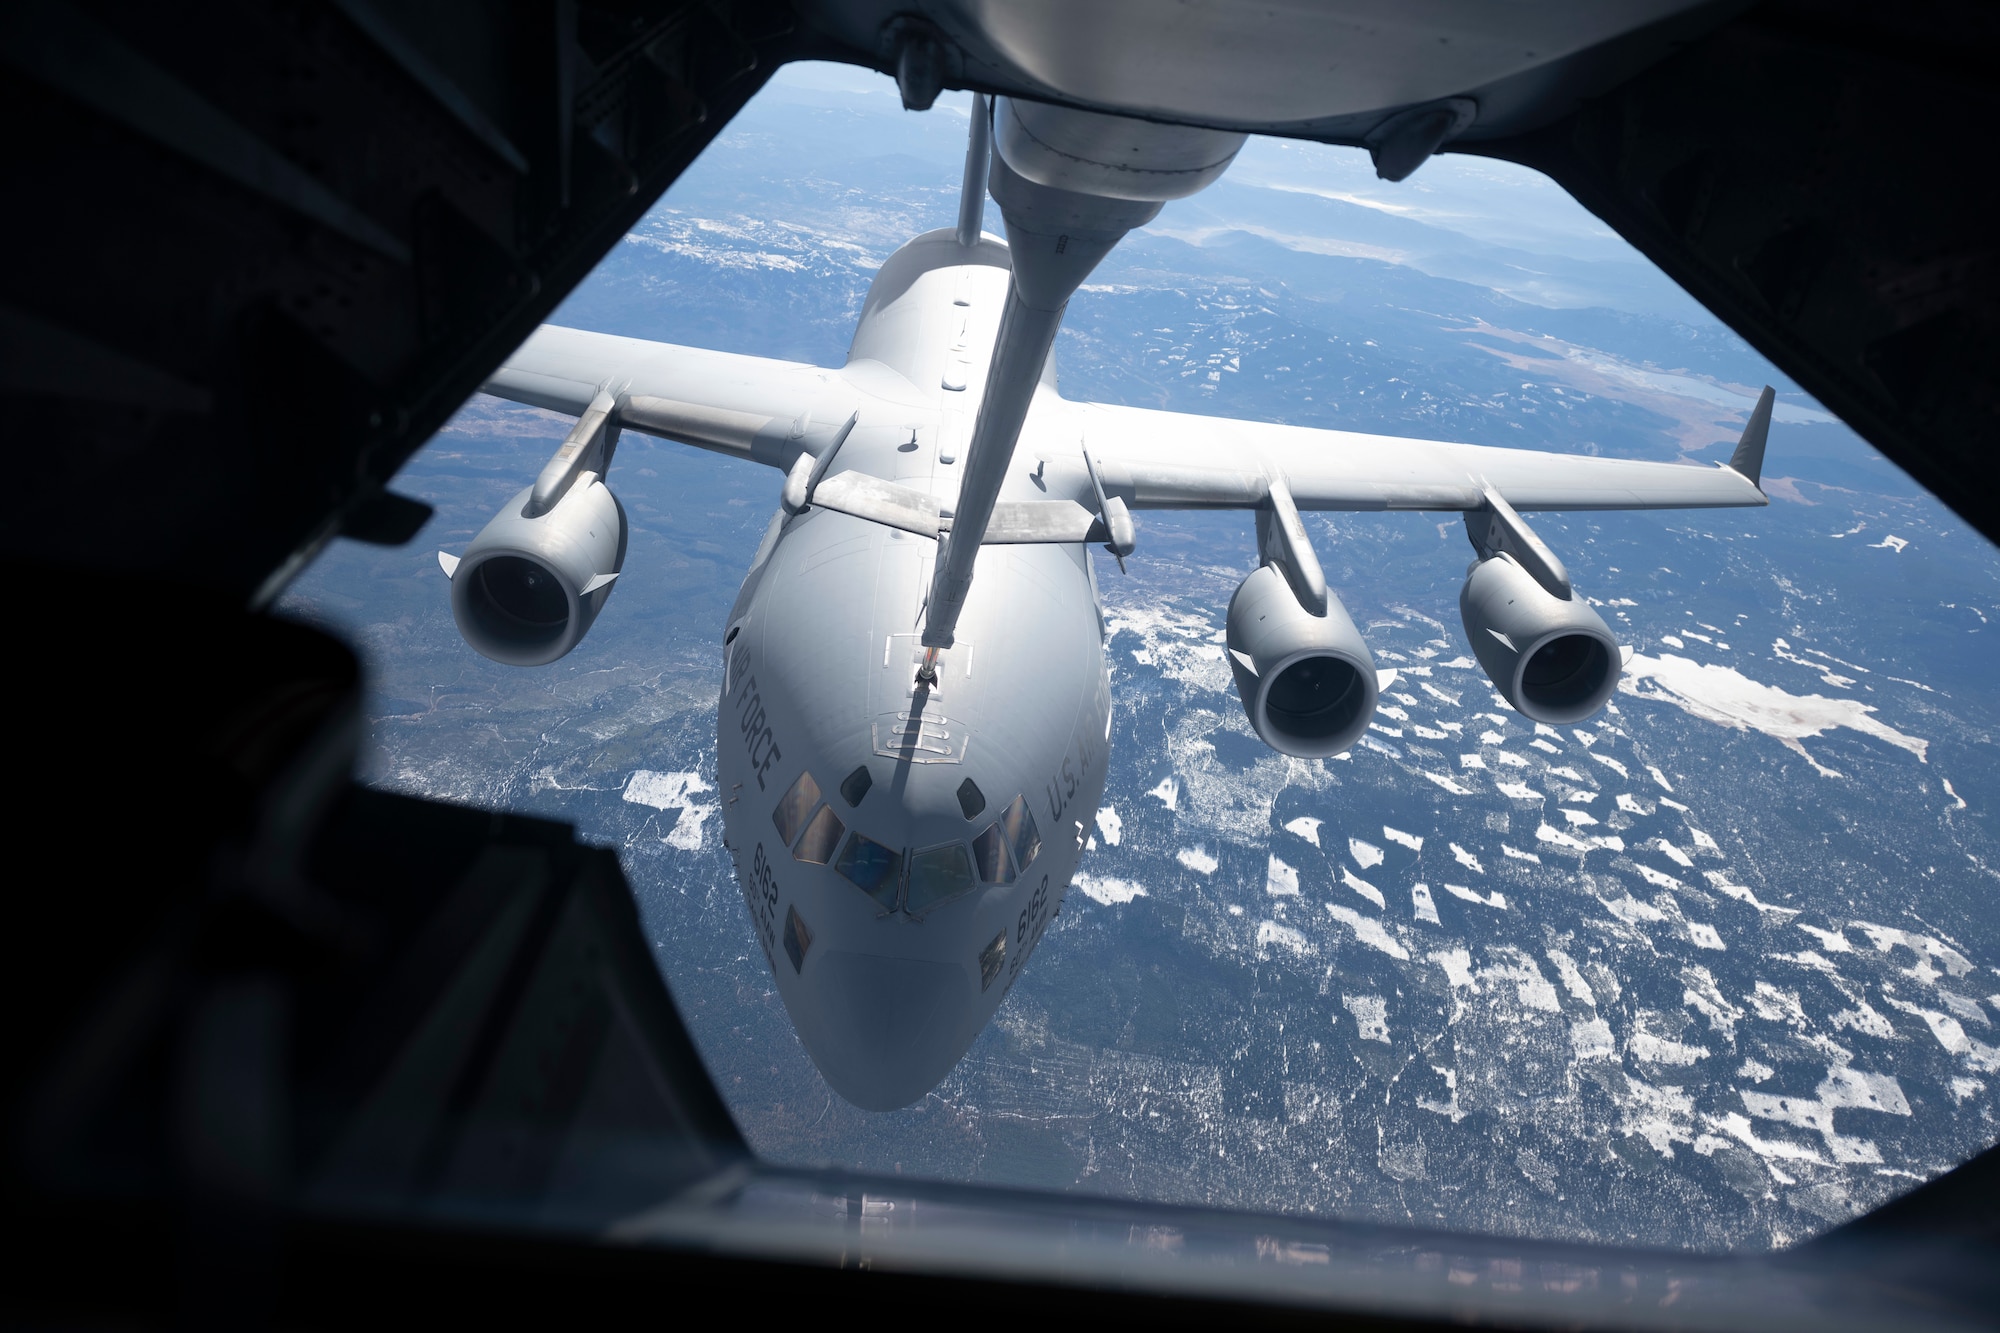 A KC-10 Extender simulates air refueling procedures with a C-17 Globemaster III Nov. 16, 2020, over Oregon. The aircrew for both aircraft from Travis Air Force Base, California, simulated air refueling procedures as part of a basewide exercise. (U.S. Air Force photo by Airman 1st Class Alexander Merchak)